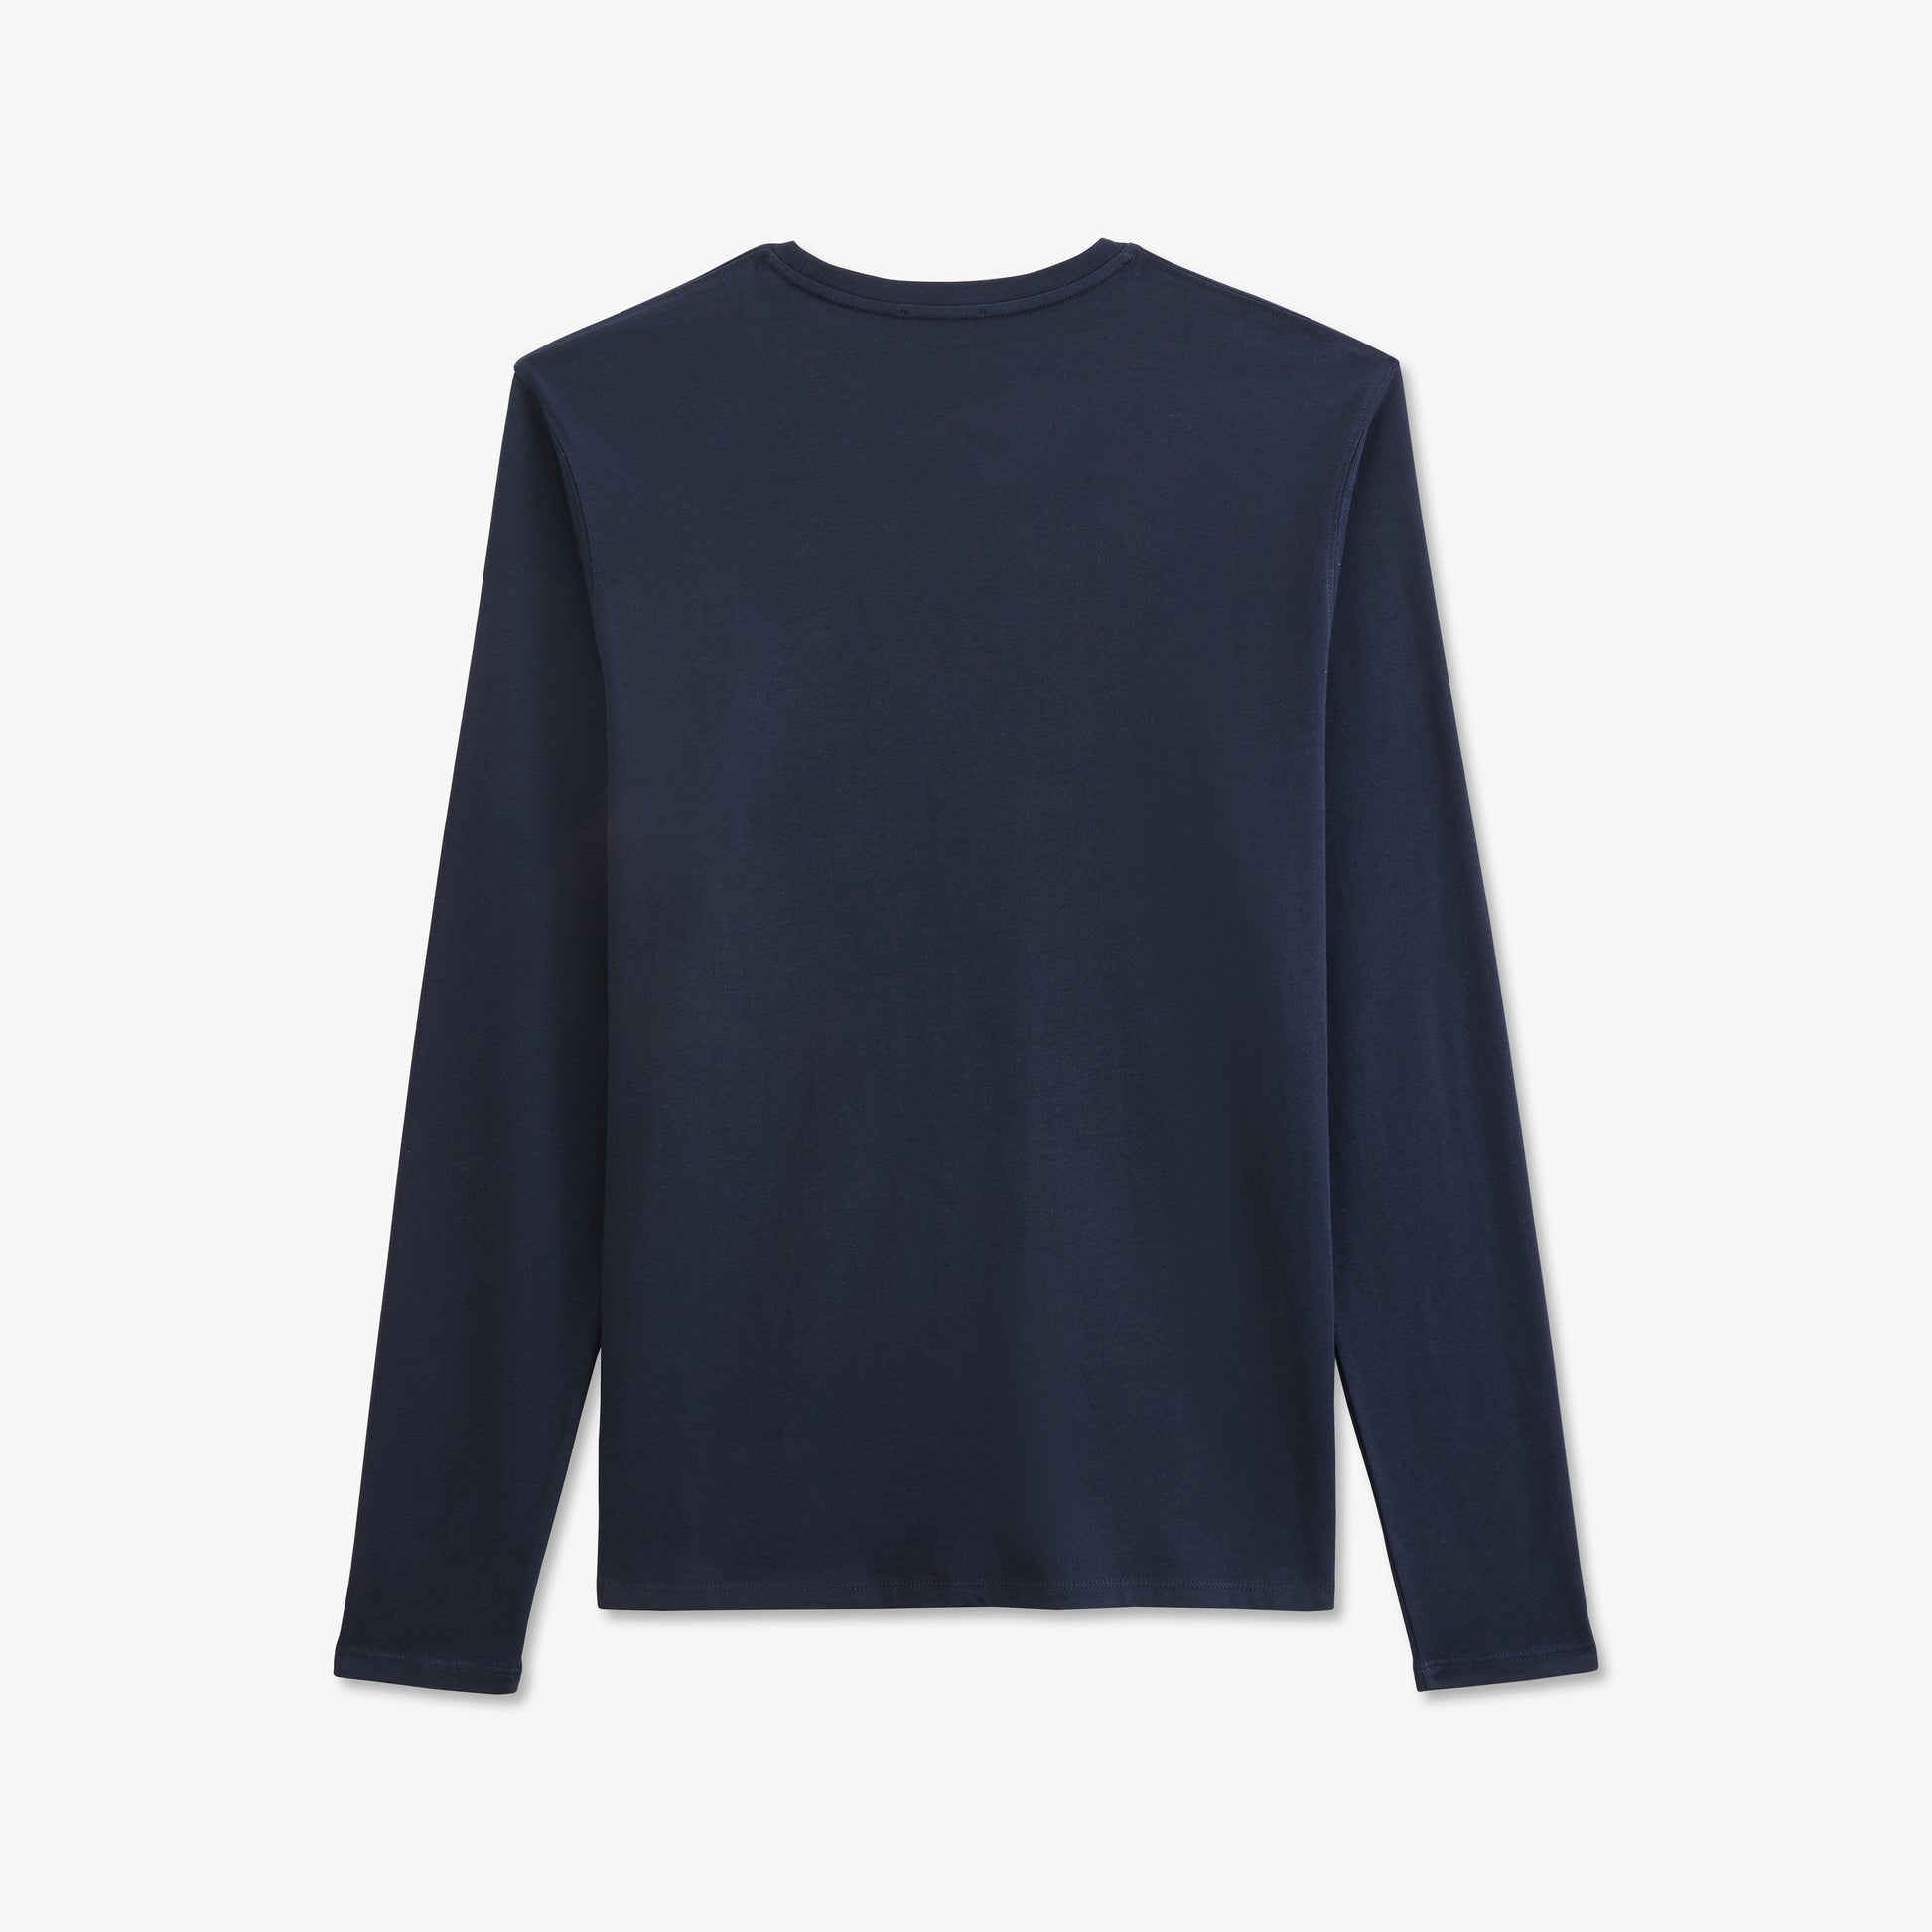 Long Sleeved Navy Blue Cotton T-Shirt_PPKNITLE0007_BLF_05